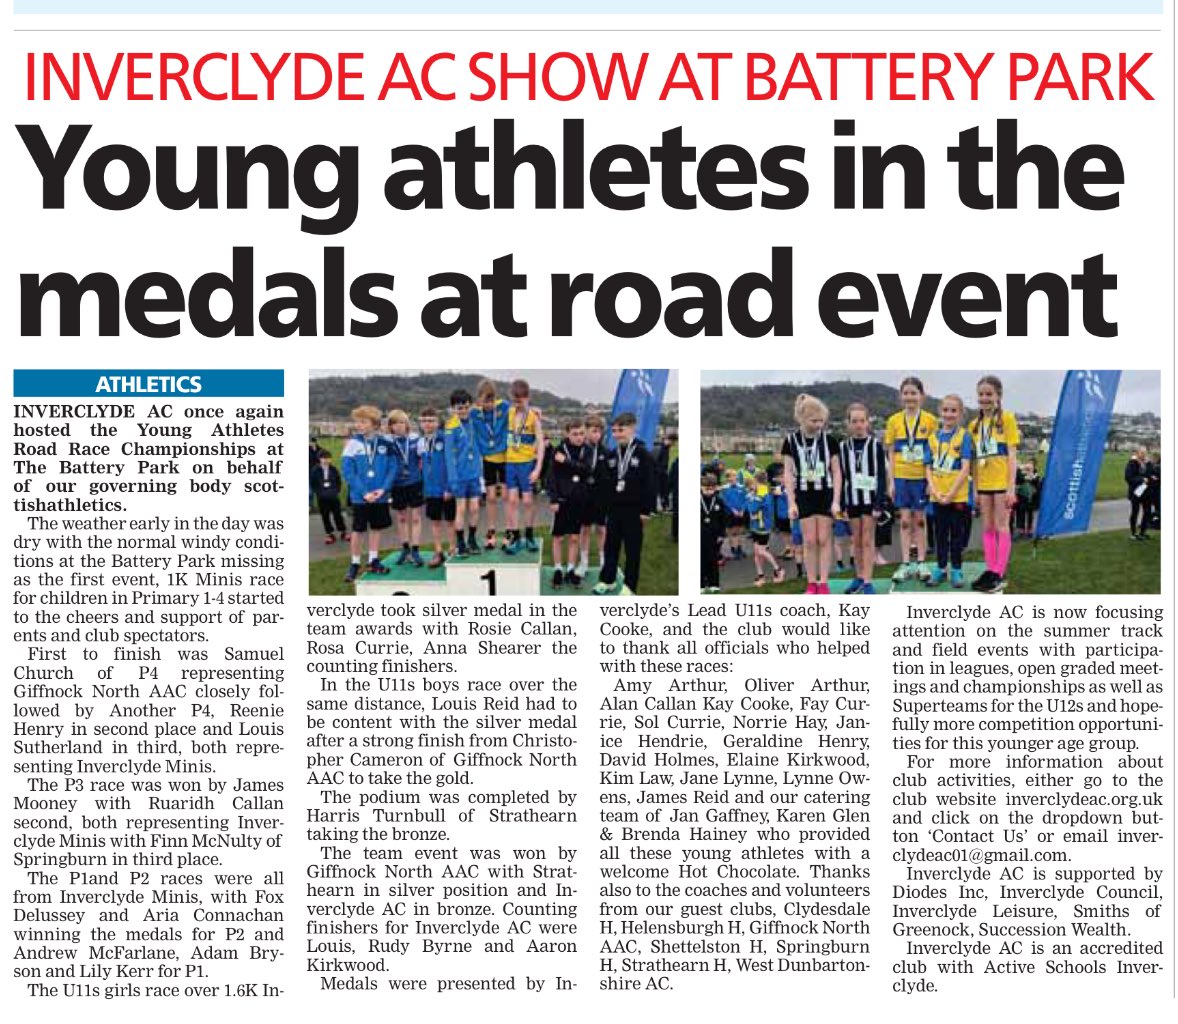 The recent Young Athletes Road Race champs at the Battery park is featured in today’s @greenocktele 🙌🙌